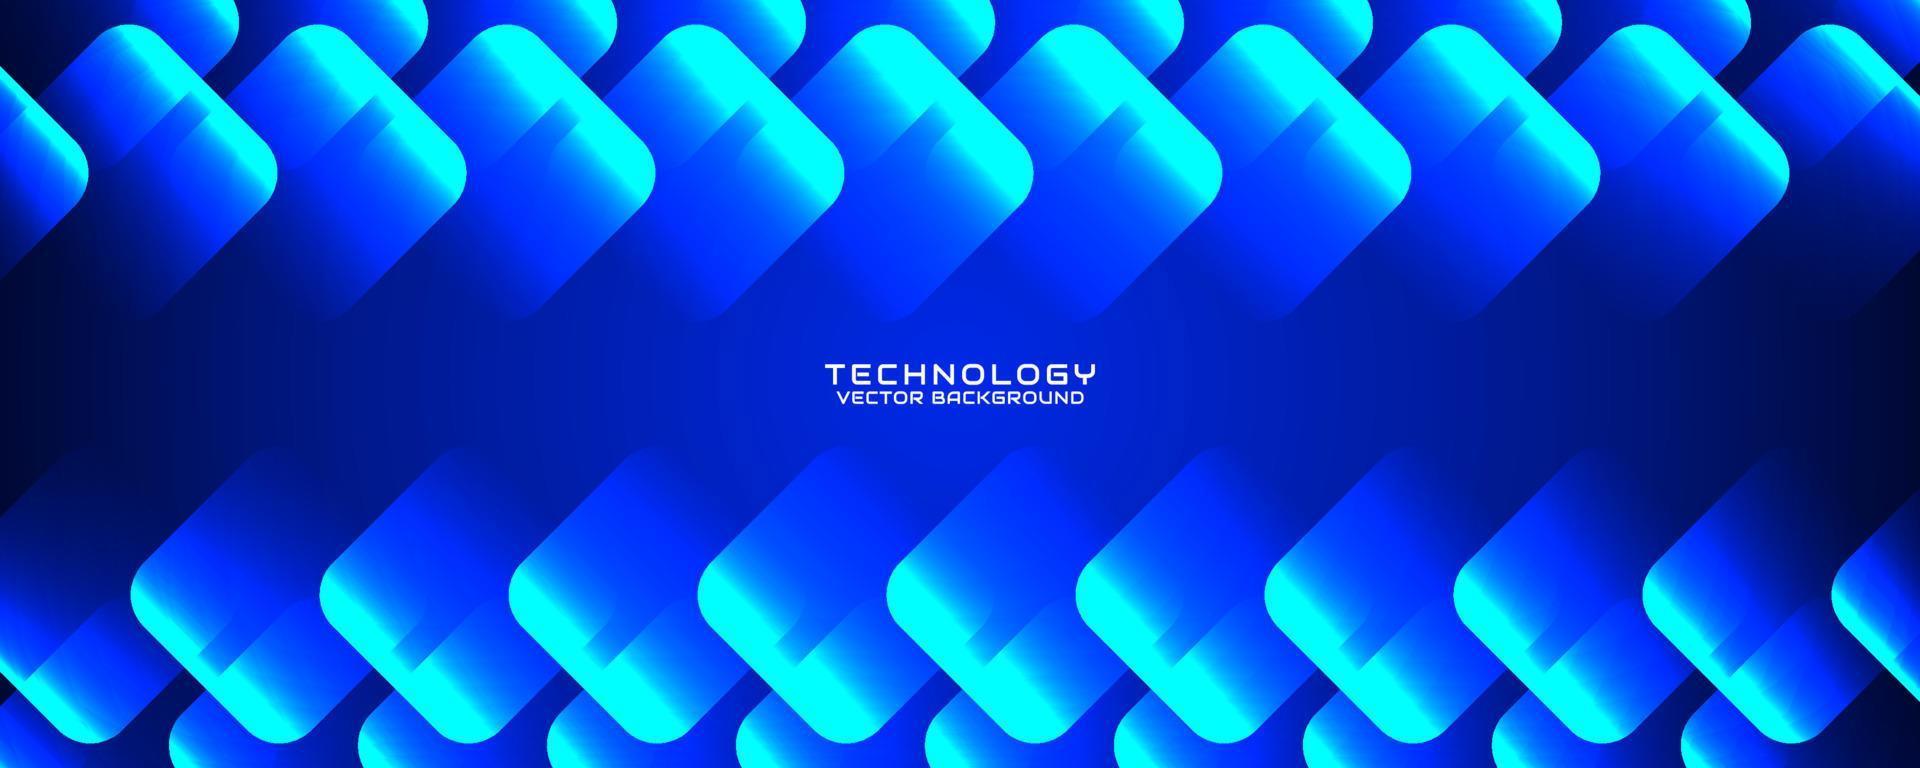 3D blue technology abstract background overlap layer on dark space with rounded squares effect. Graphic design element cutout style concept for banner, flyer, card, brochure cover, or landing page vector